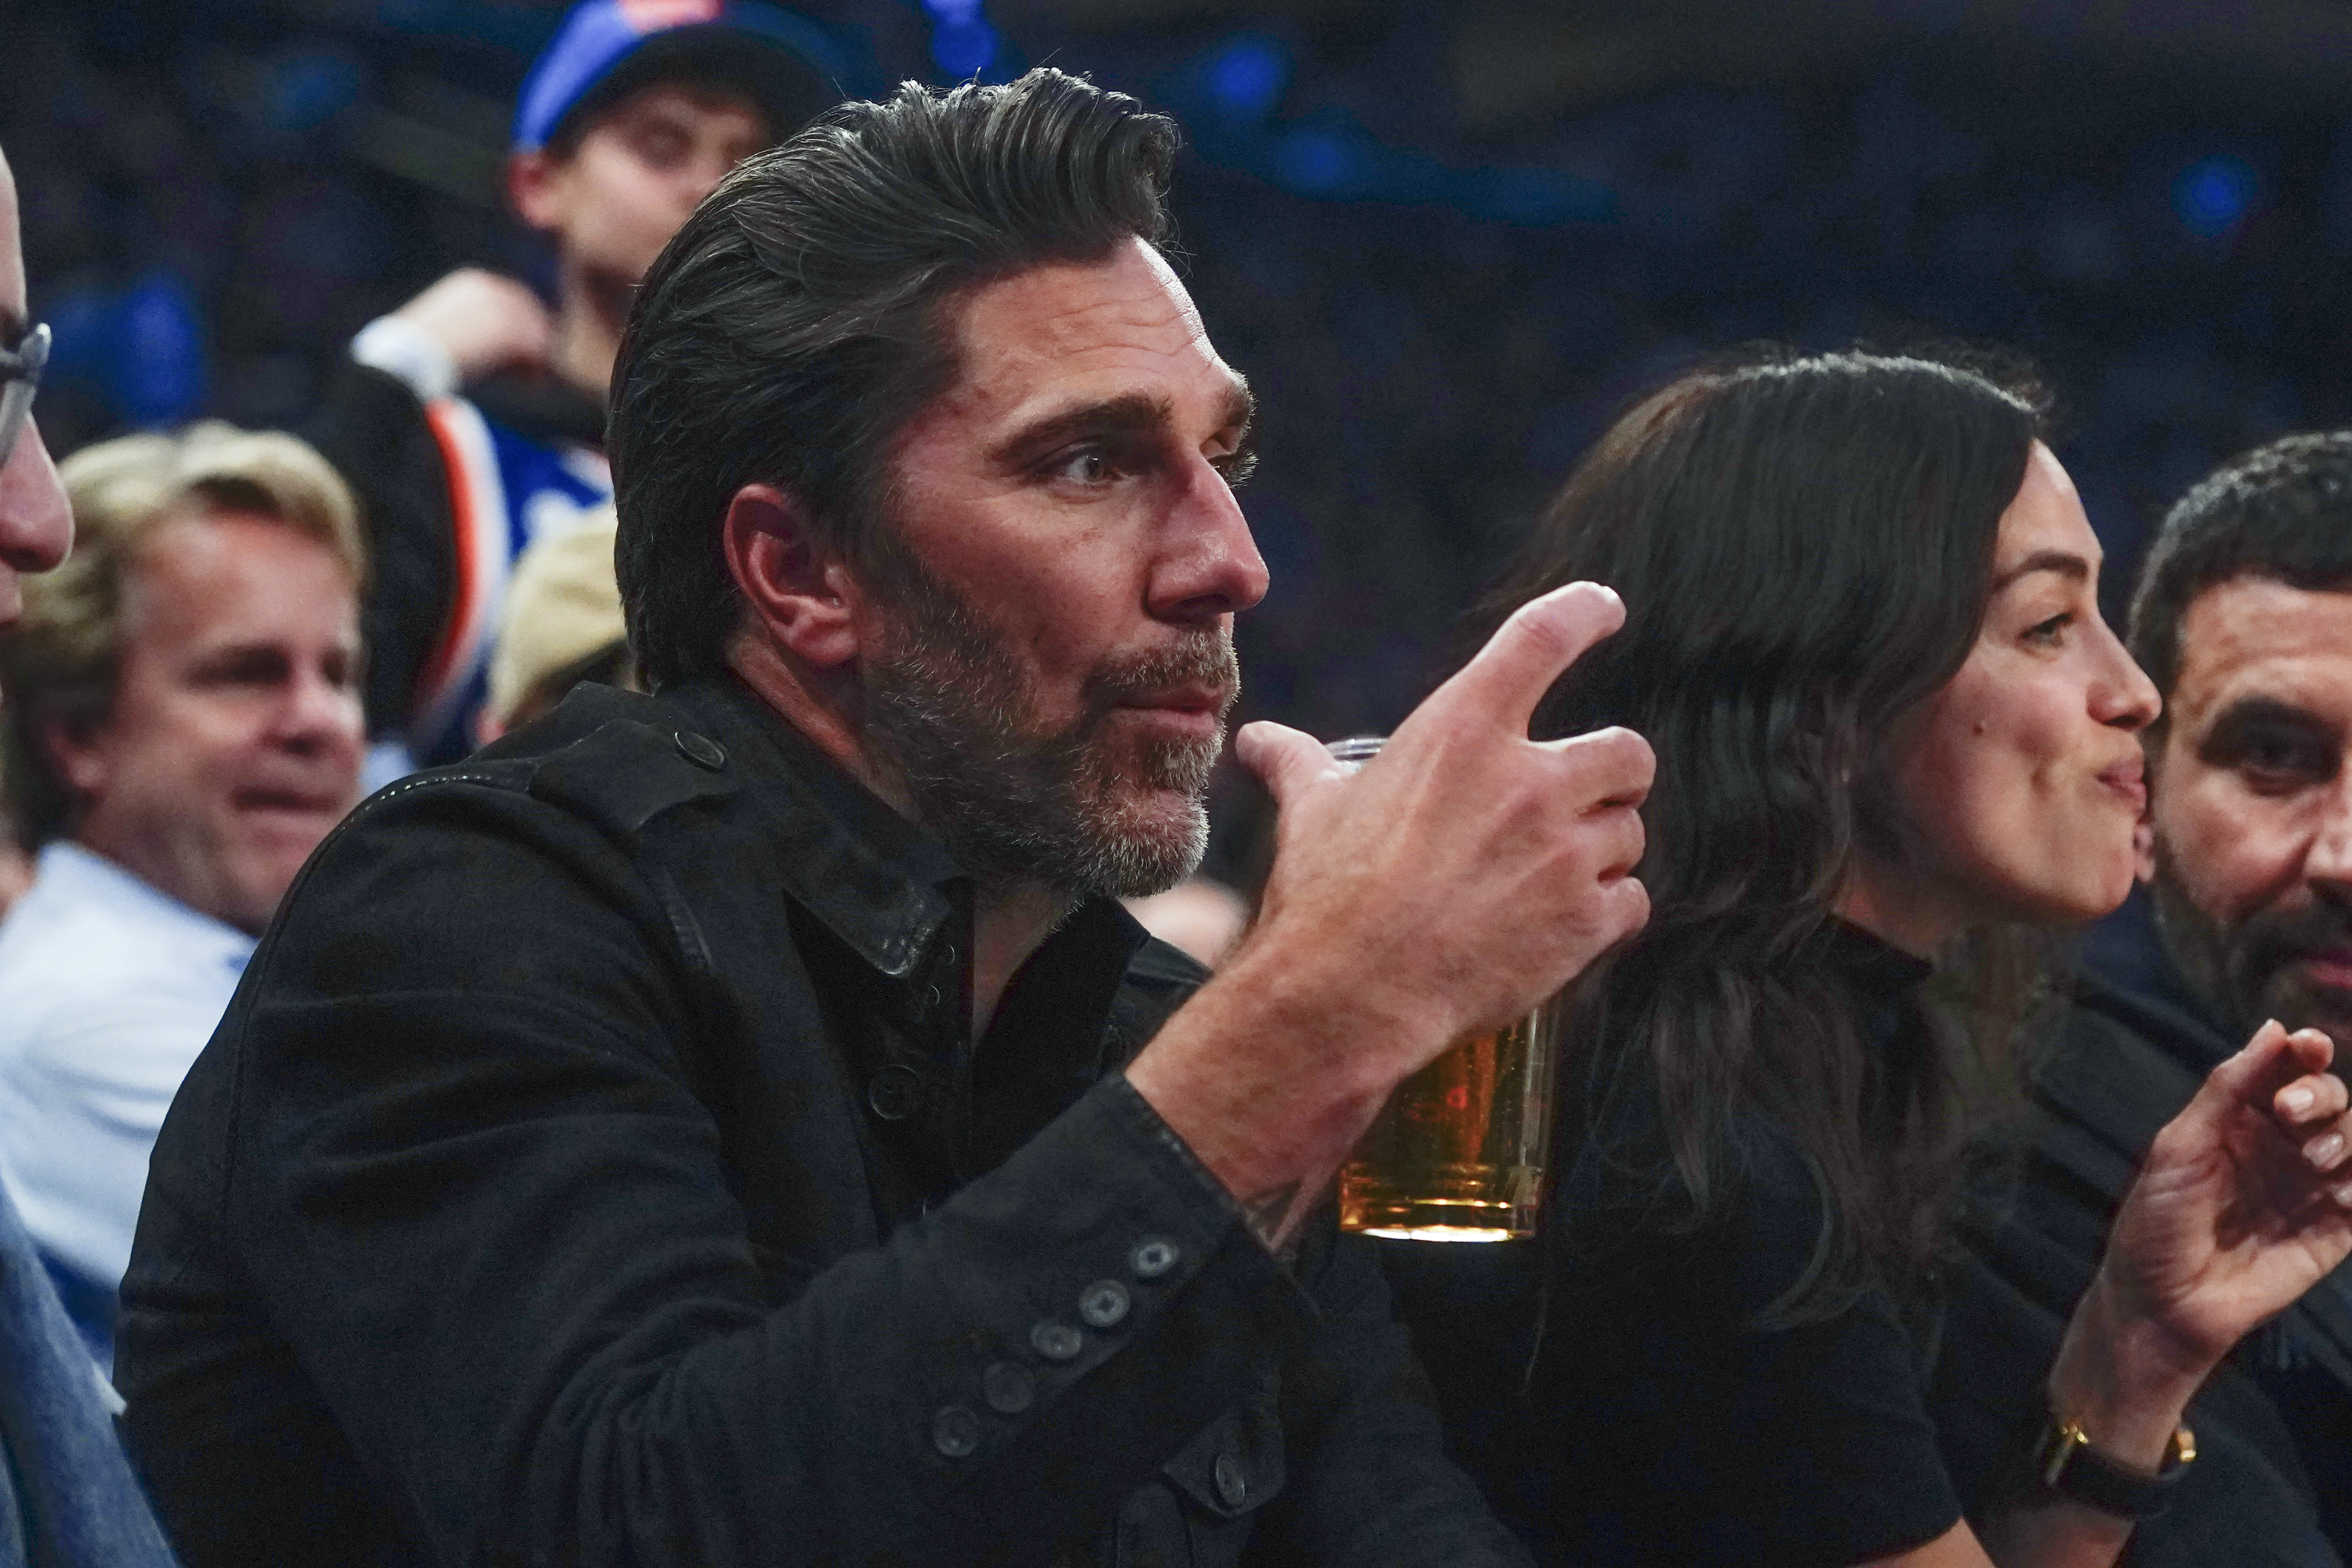 Former New York Rangers goalie Henrik Lundqvist watches the game during the first half between the Los Angeles Clippers and New York Knicks at Madison Square Garden